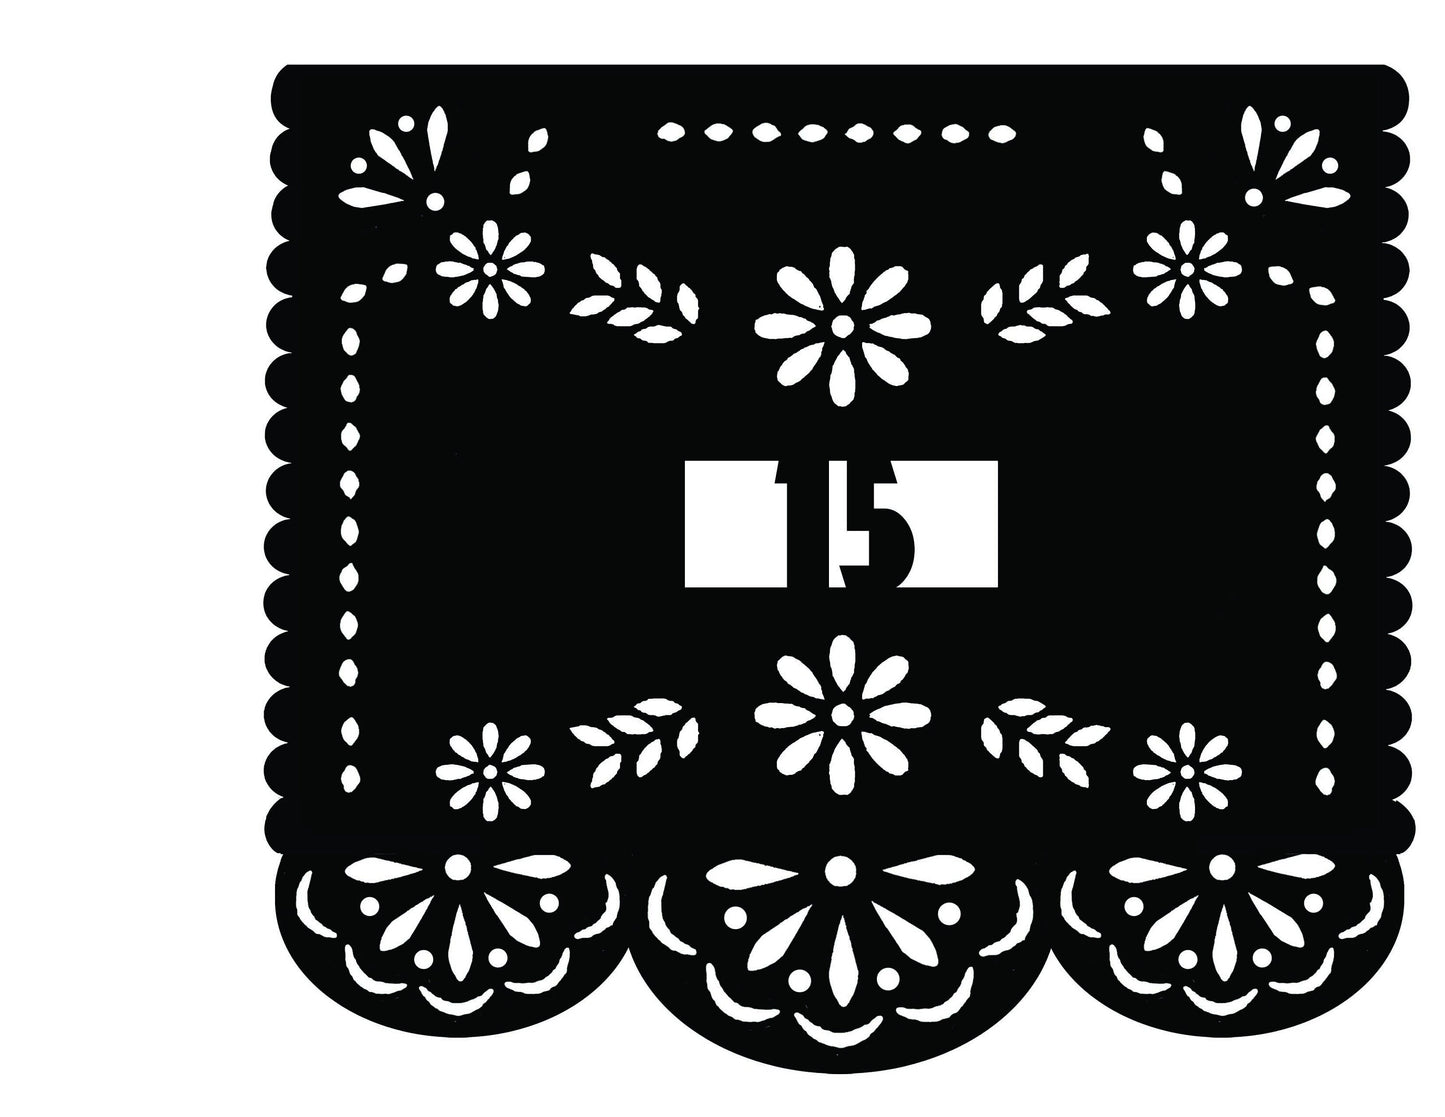 Papel Picado Quince garlands Quinceaera banners Personalized Fiesta Mexican Fiesta Decoration QUINCE garland 15th quince papel picado decor